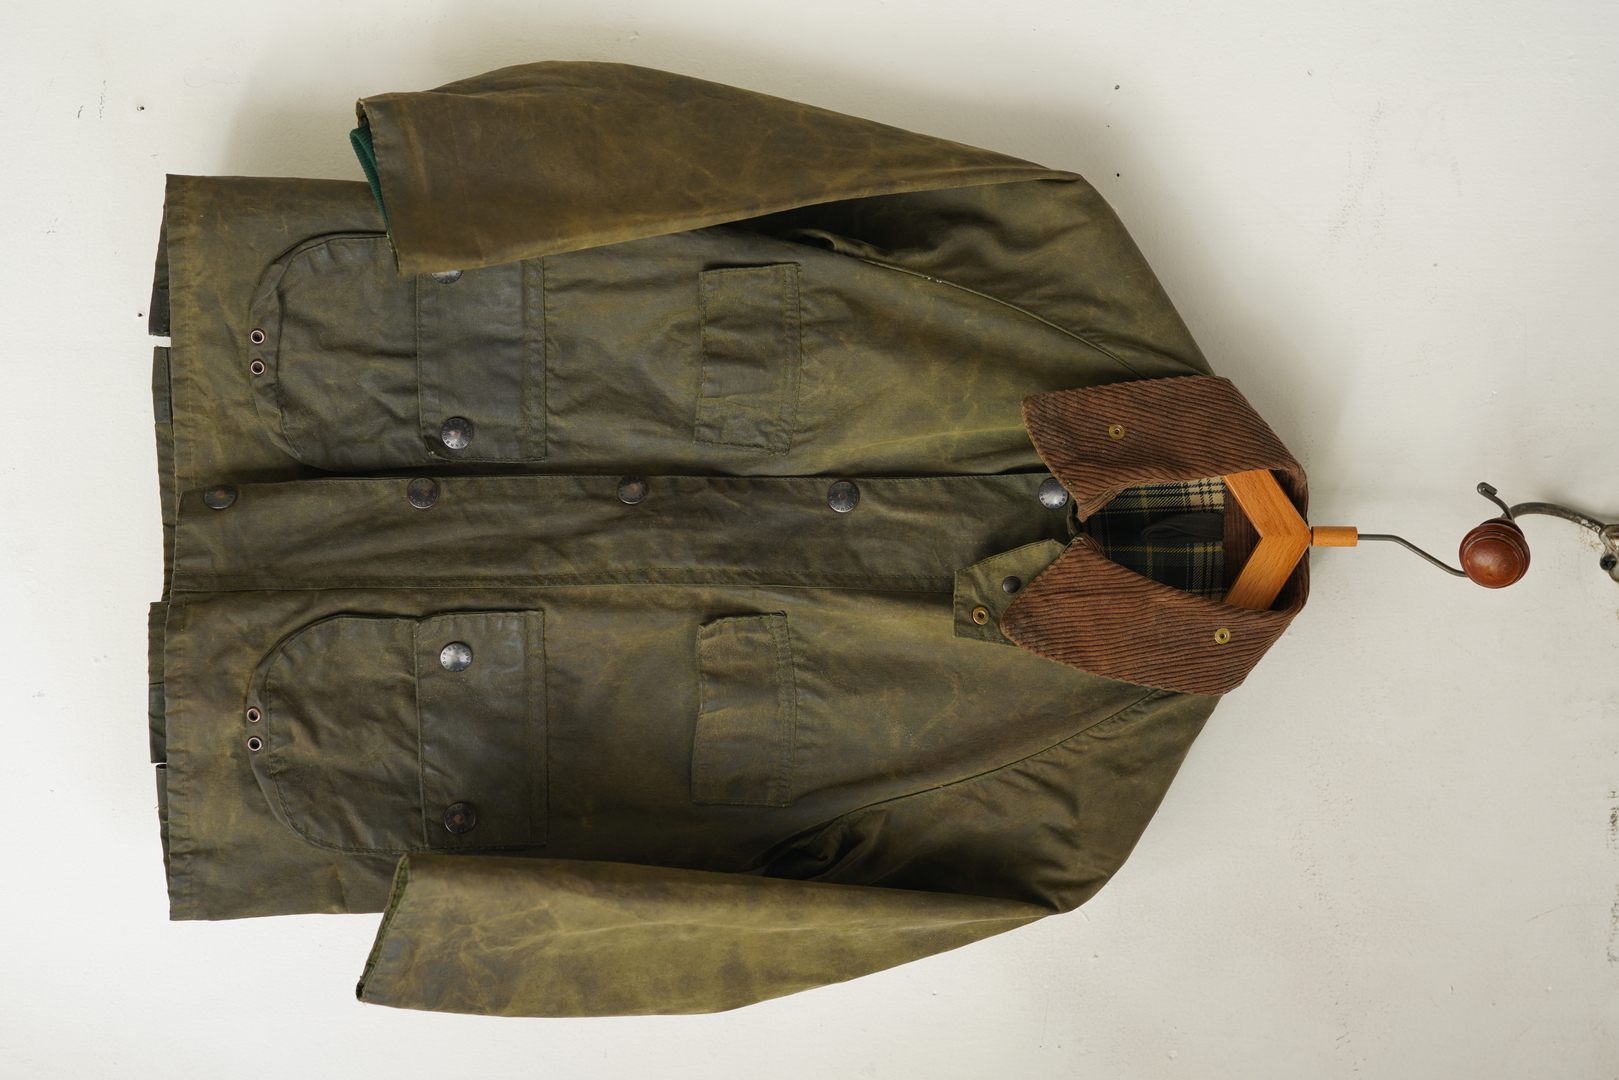 Barbour Vintage バブアーヴィンテージ商品一覧 通販 - ARCH ONLINE SHOP